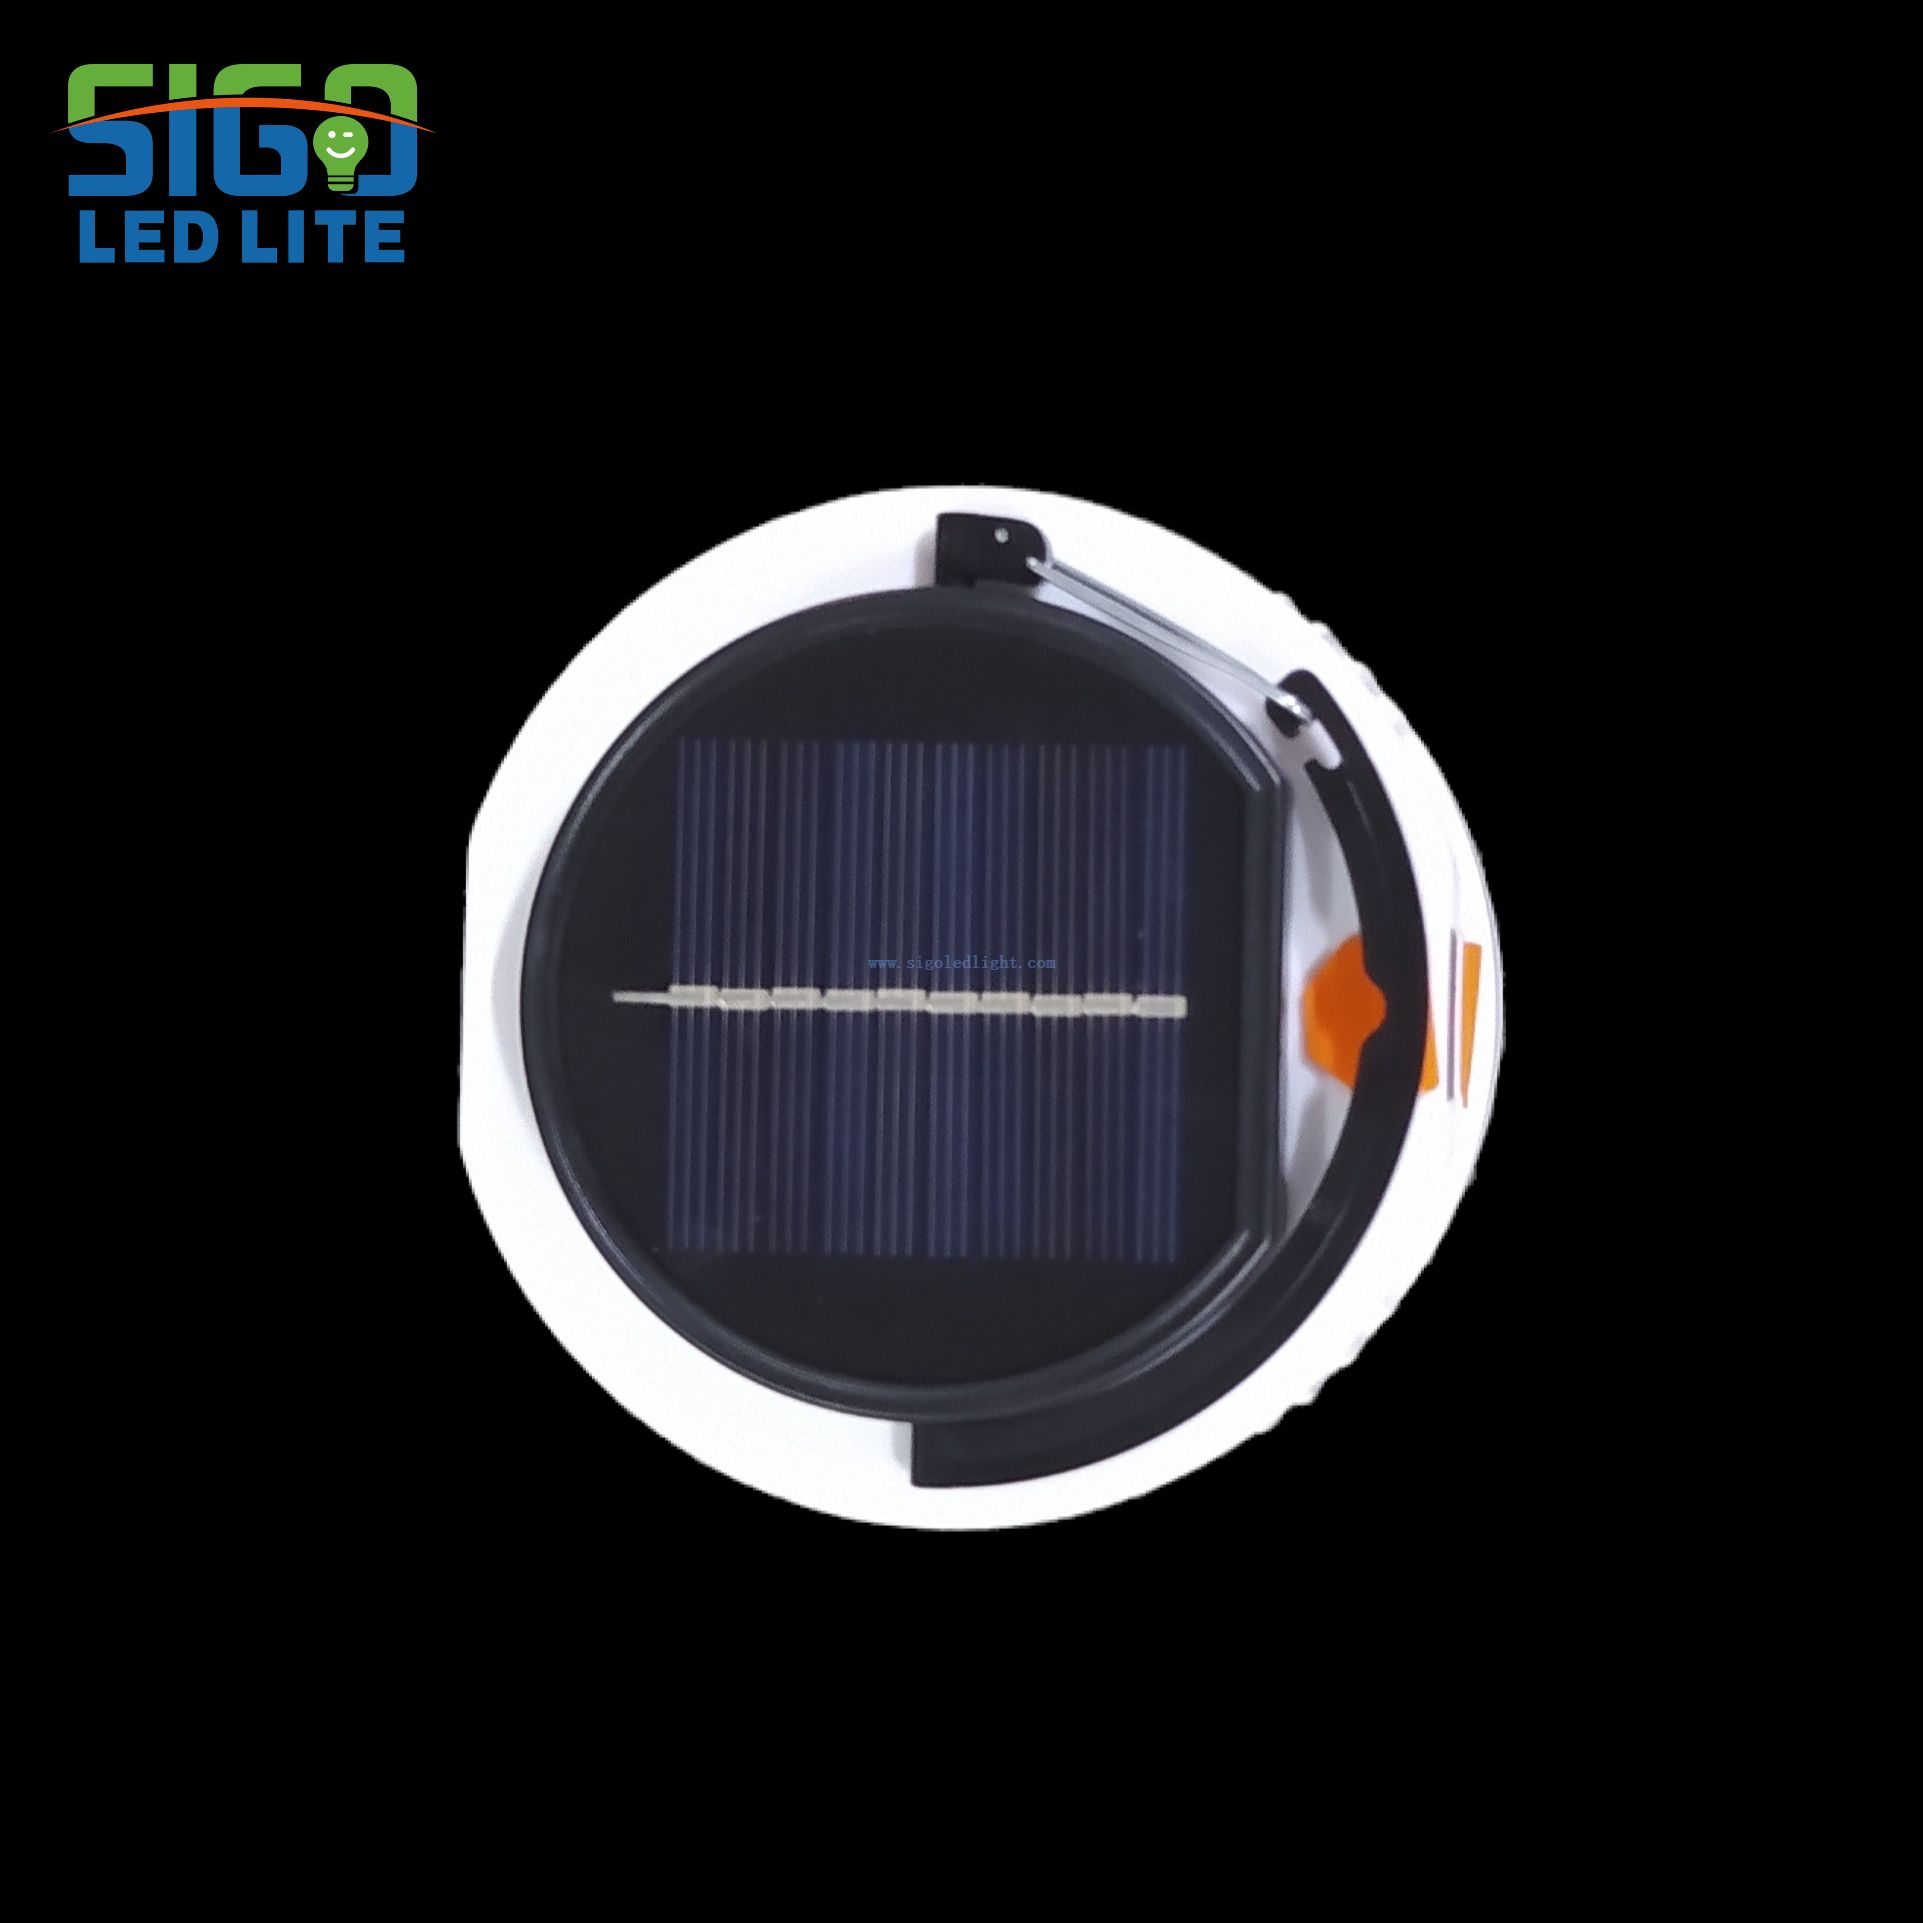 LED Solar Bulb For Household Emergency Night Market Stalls Outdoor Camping With Intelligent USB Charging And 3 Lighting Modes